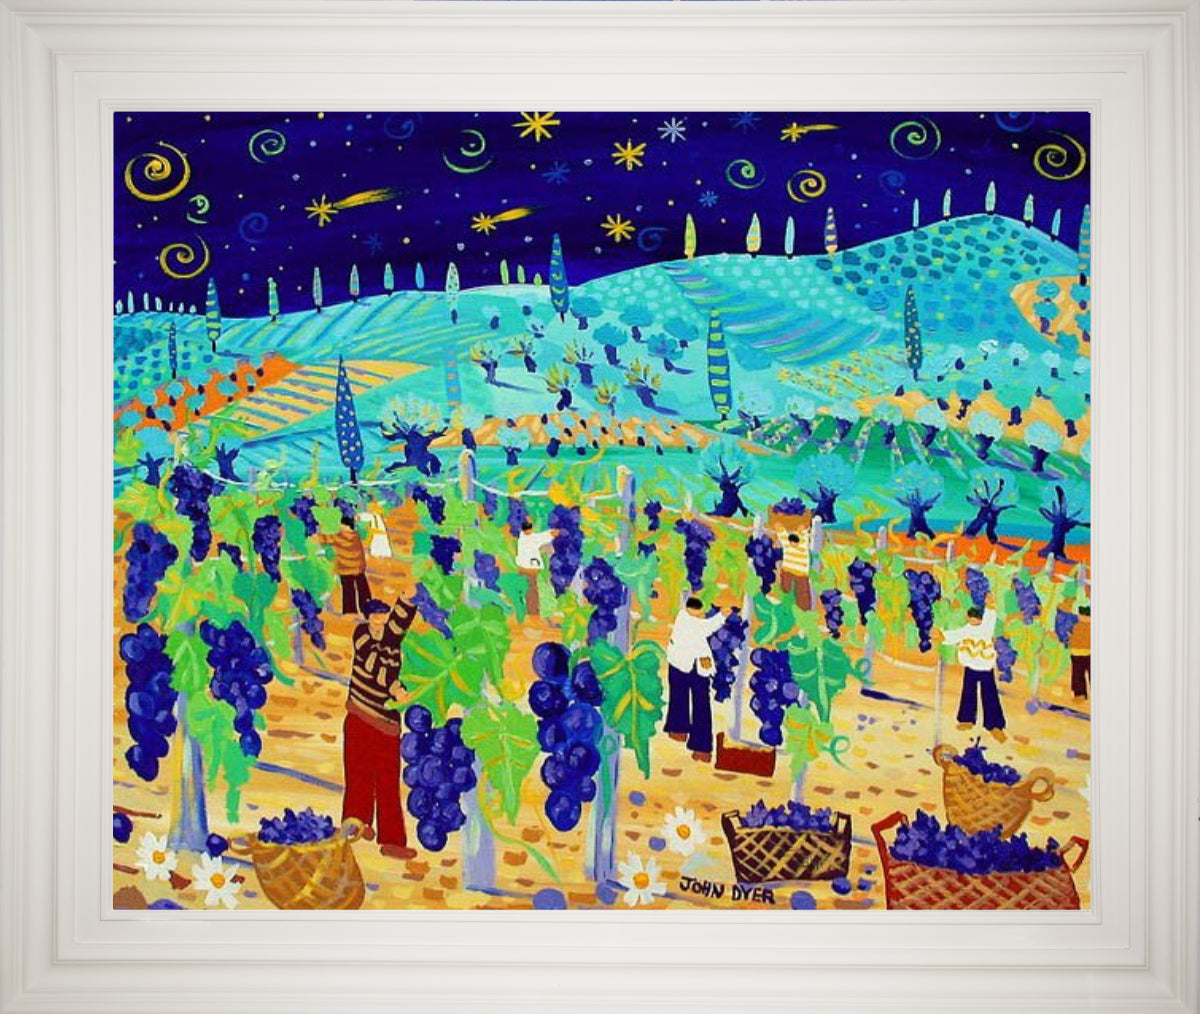 Original Painting of Tuscany in Italy by John Dyer. 'Juicy Grapes and Shooting Stars'. Italian Art Gallery